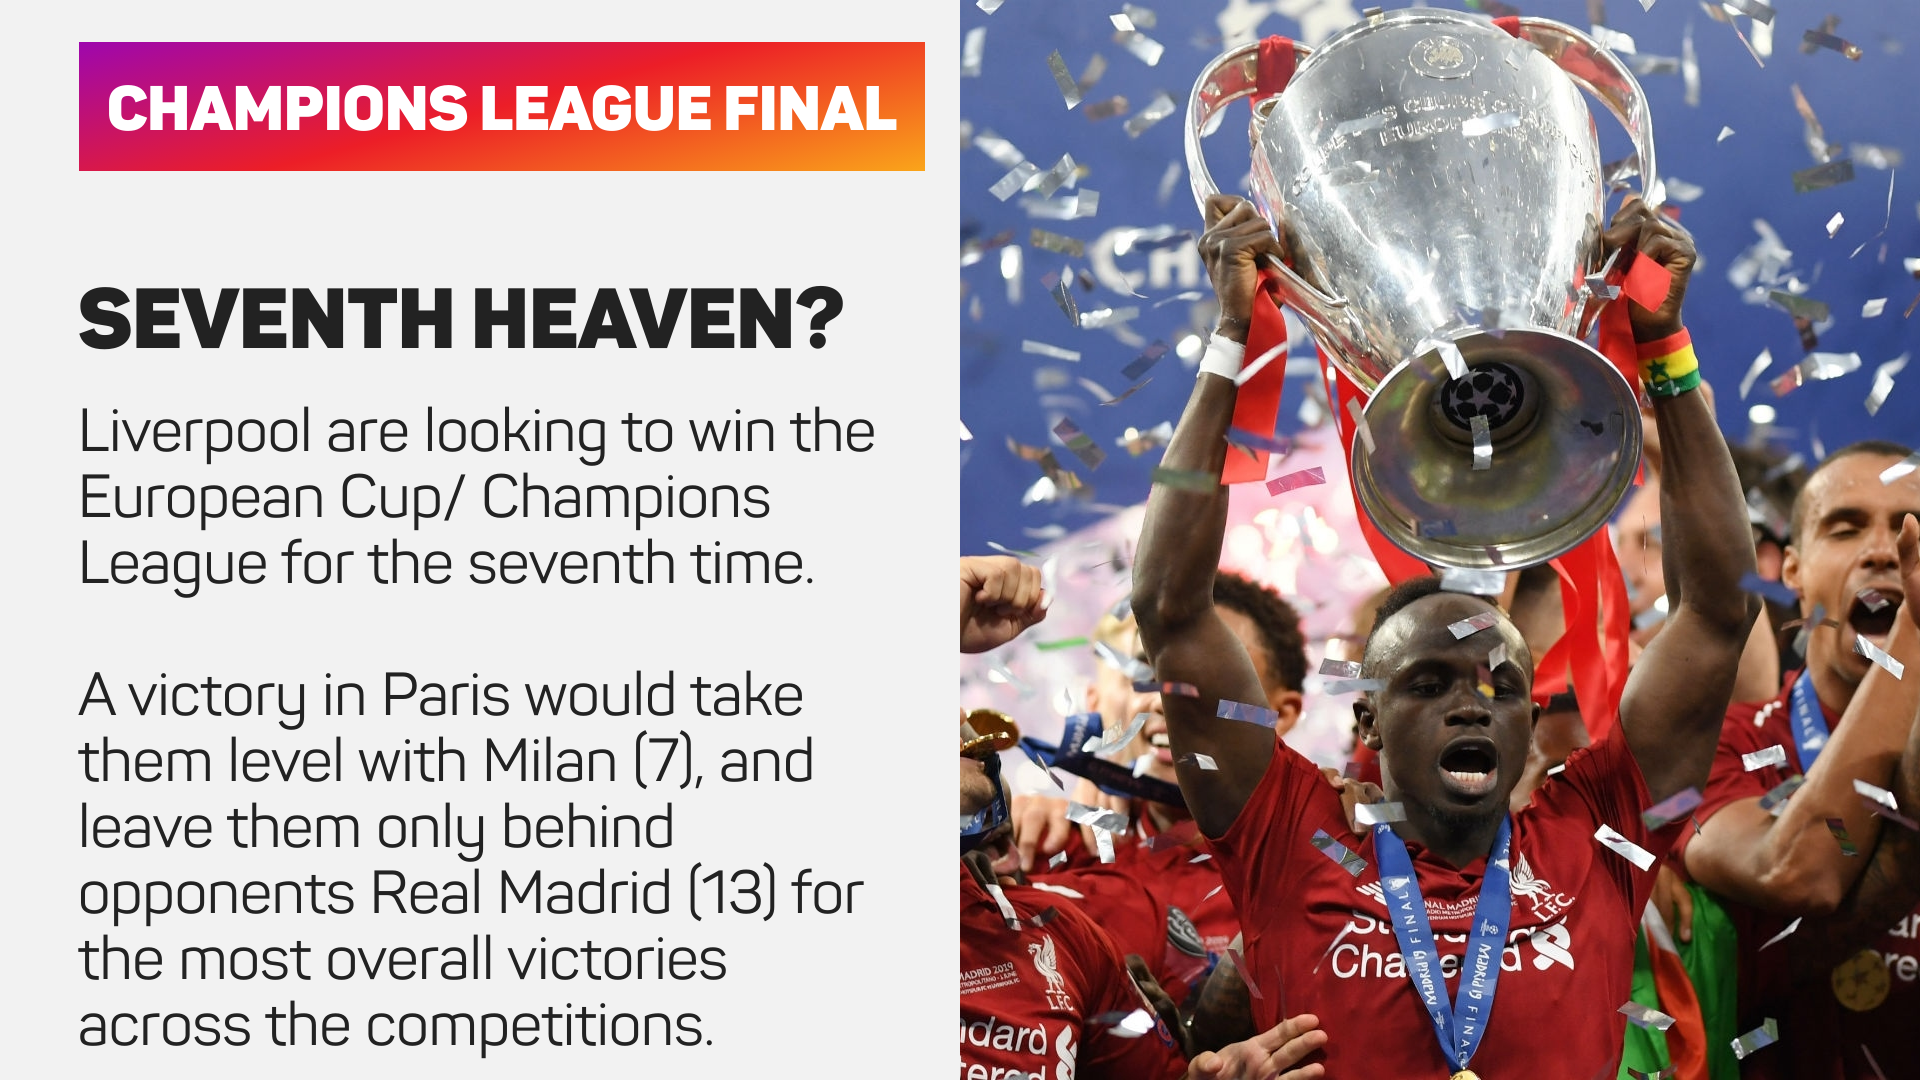 Liverpool are looking to win their seventh European Cup/ Champions League